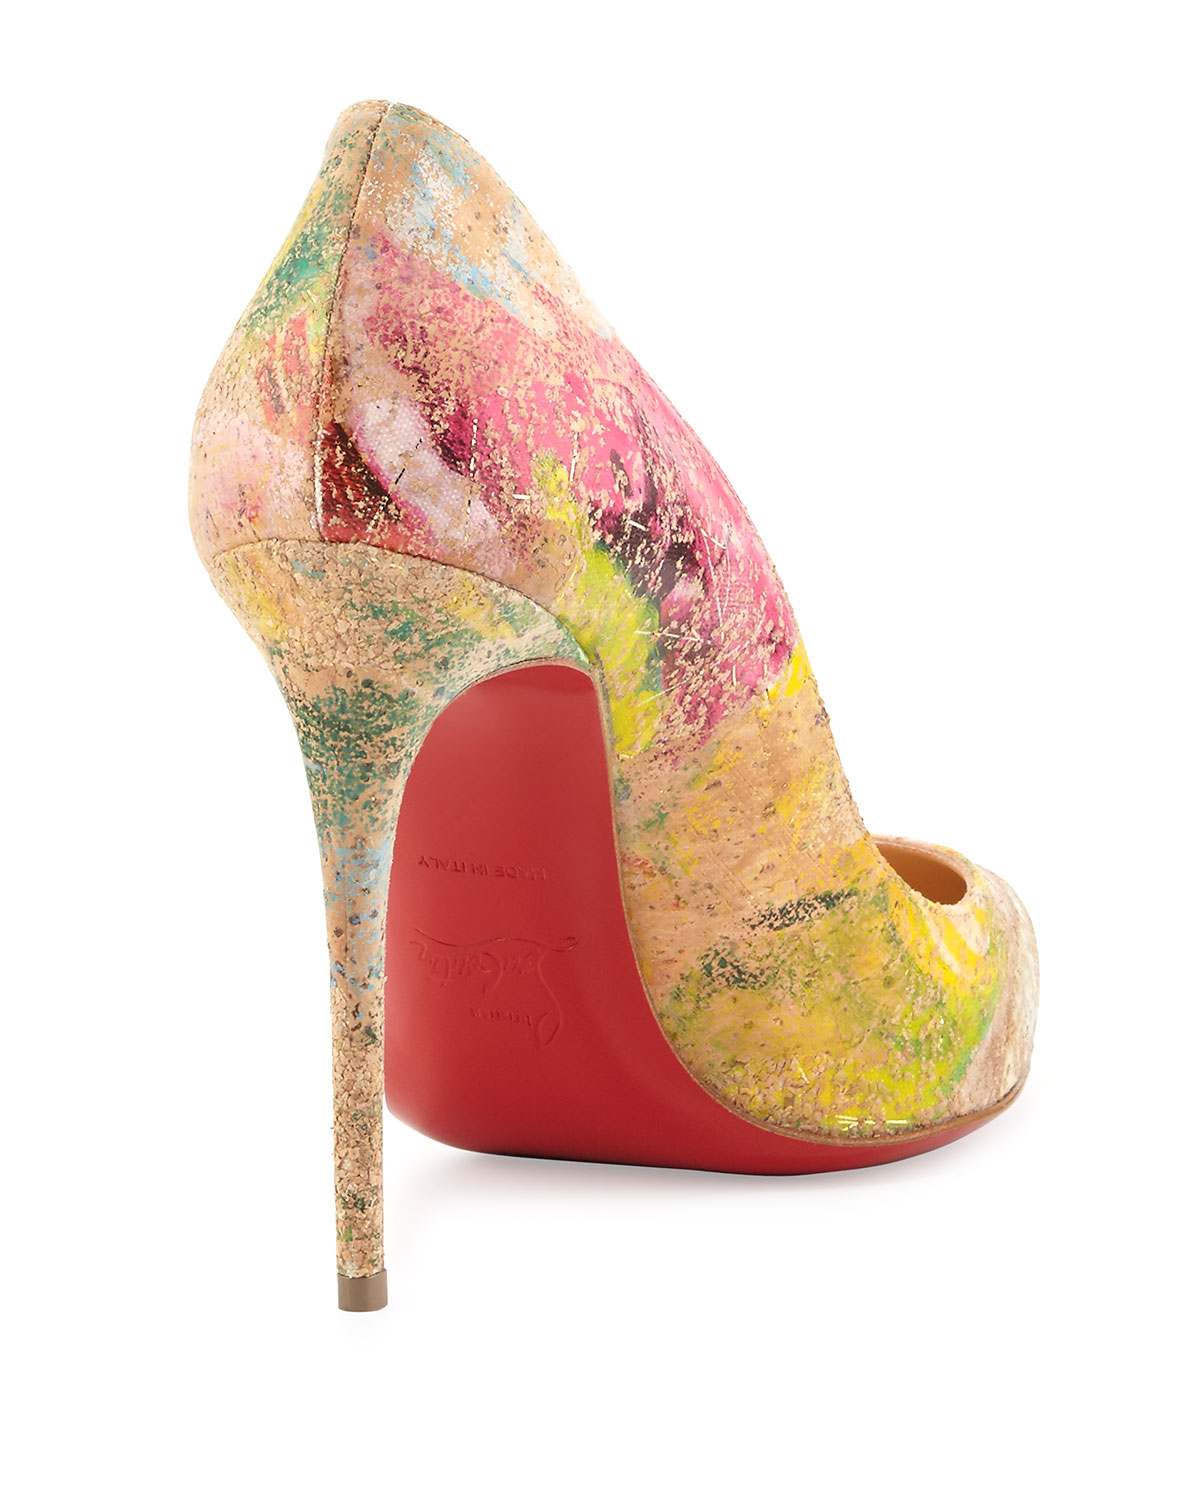 Christian louboutin Pigalles Follies Marble-Print Cork Pumps in ...